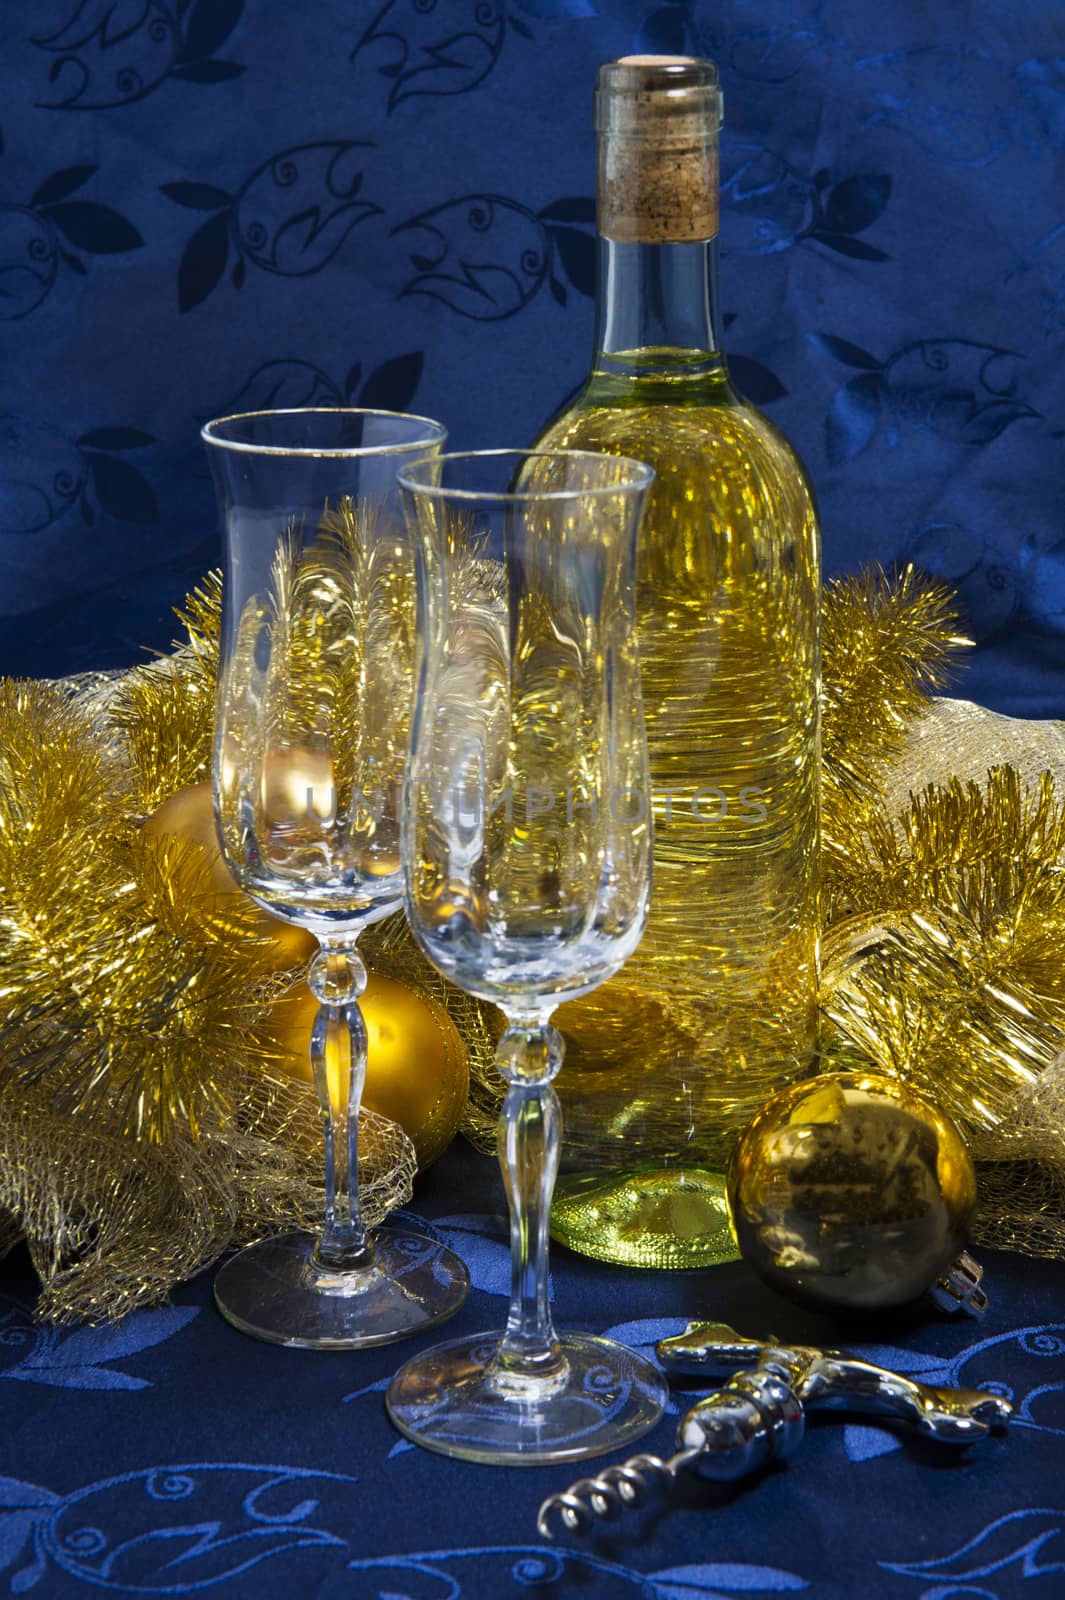 Bottle of white wine, glasses and Christmas decorations by carla720